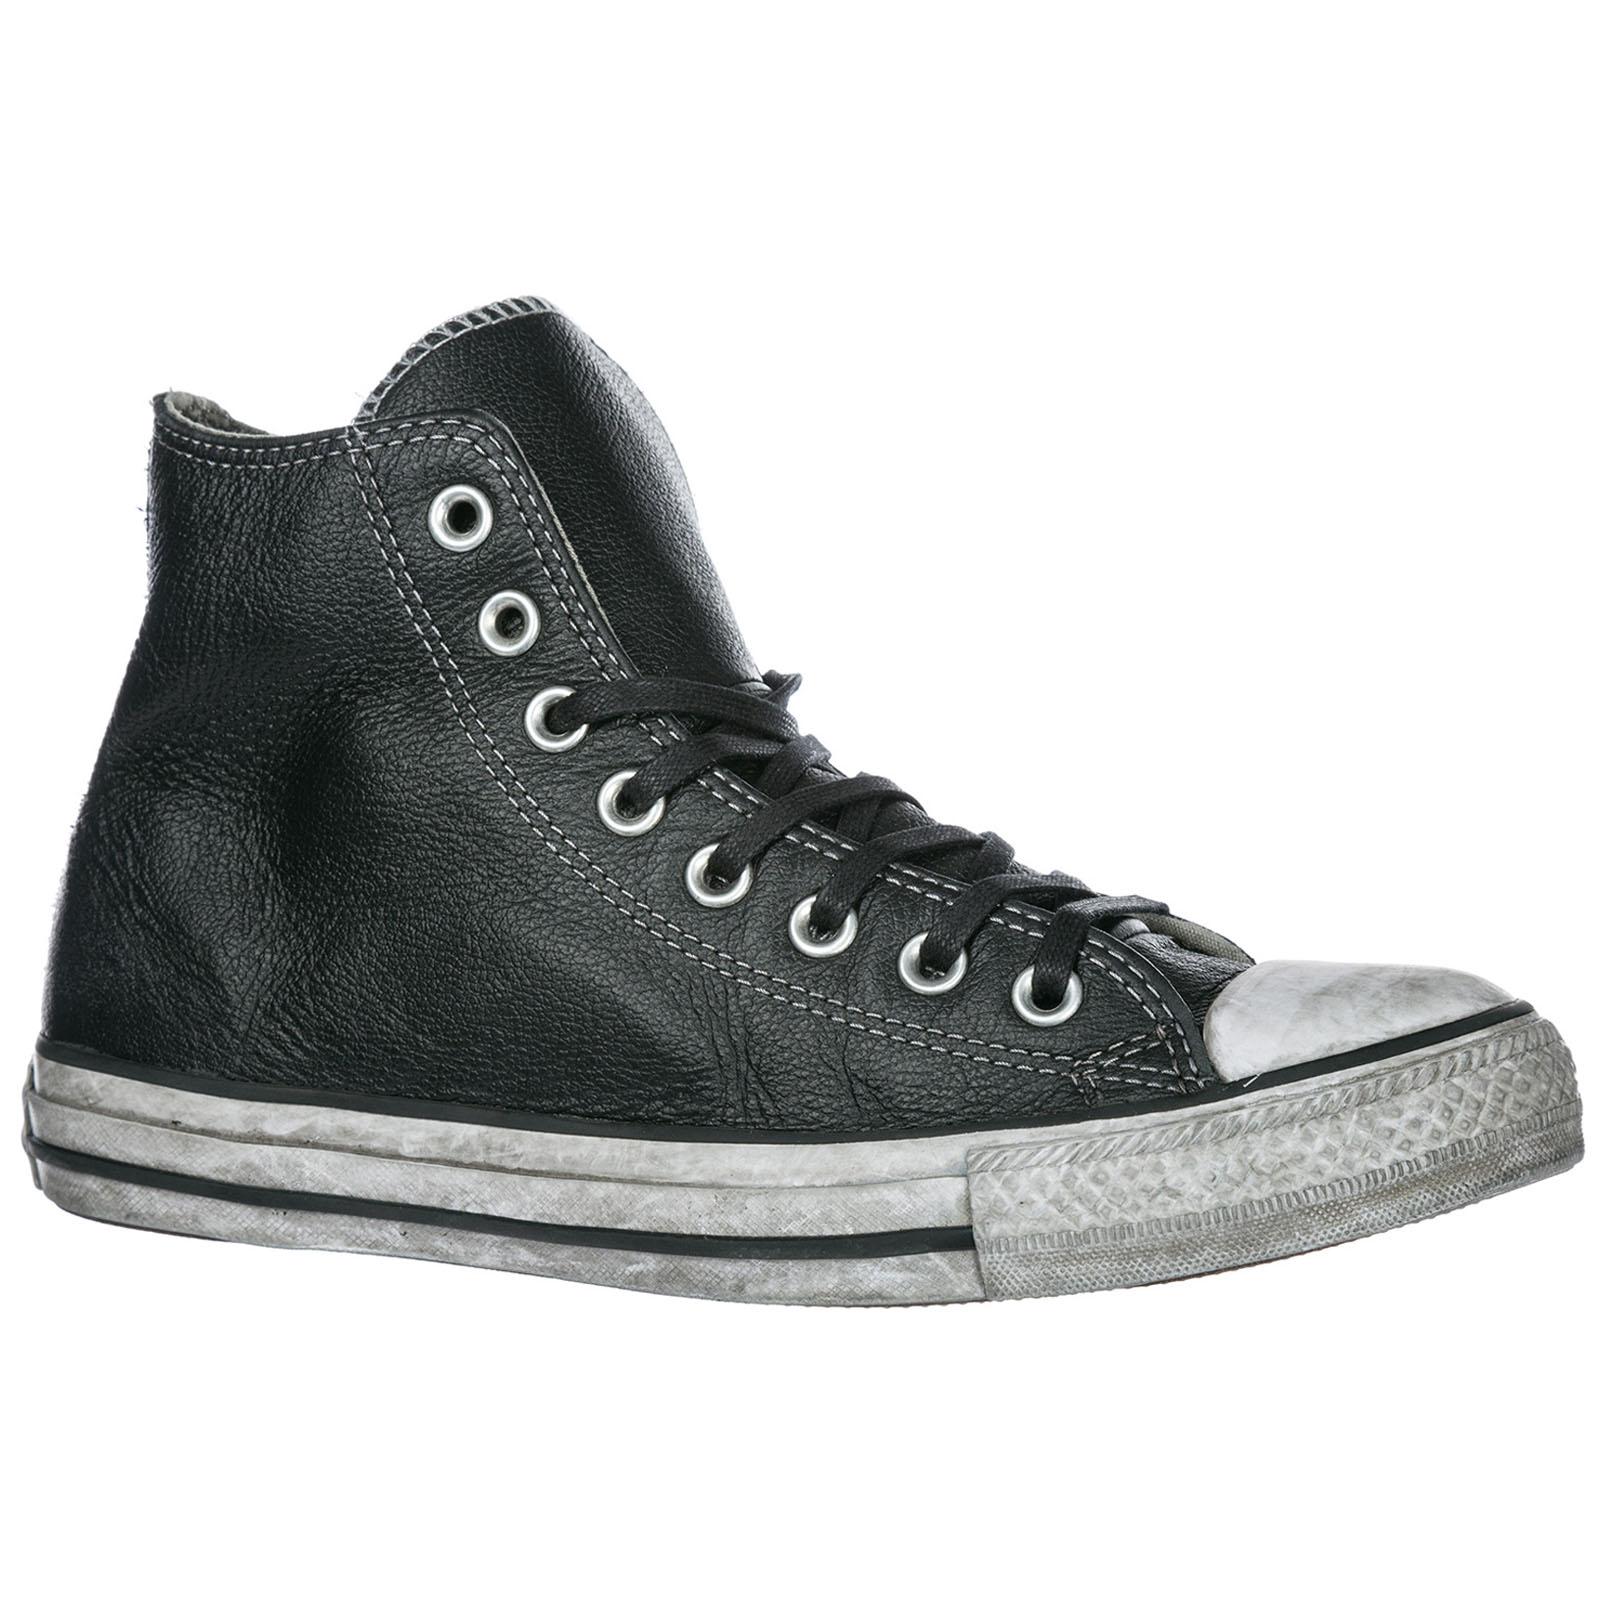 Converse Shoes High Top Leather Trainers Sneakers Limited Edition ... افكار لعيد الام